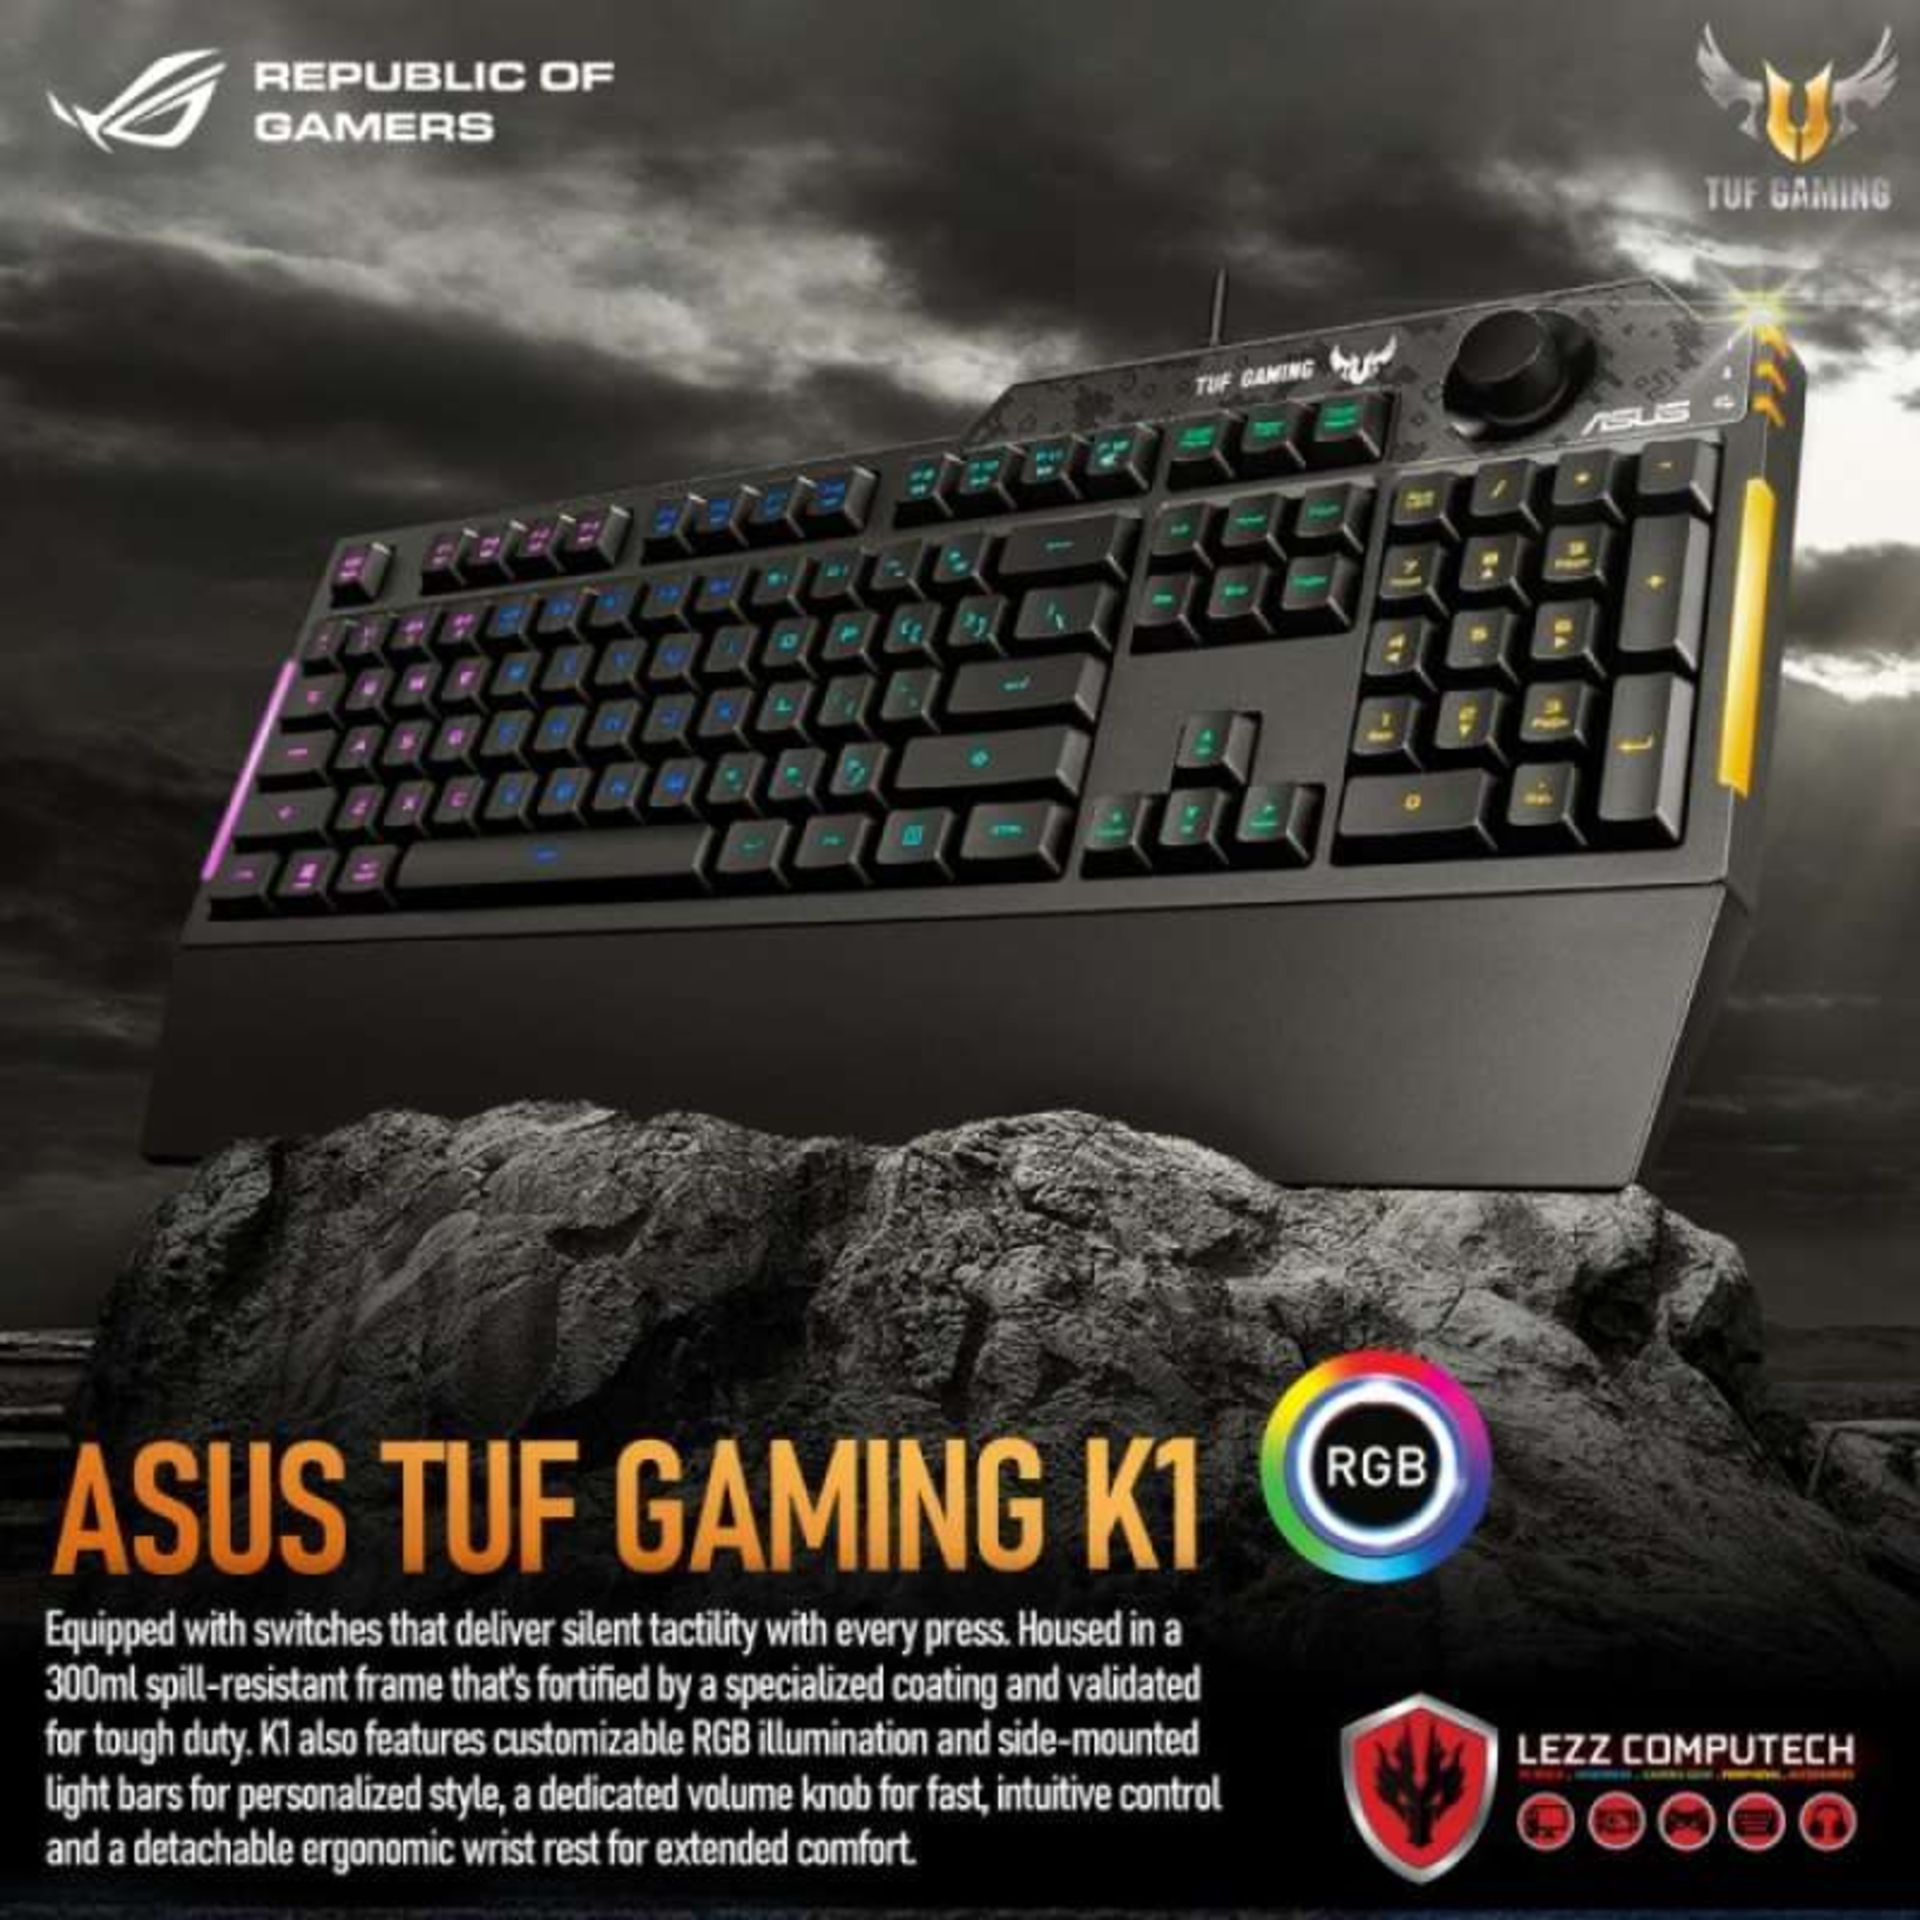 1 x Asus TUF K1 RGB Gaming Keyboard - Brand New and Boxed - Features Volume Control, Side Light - Image 7 of 8